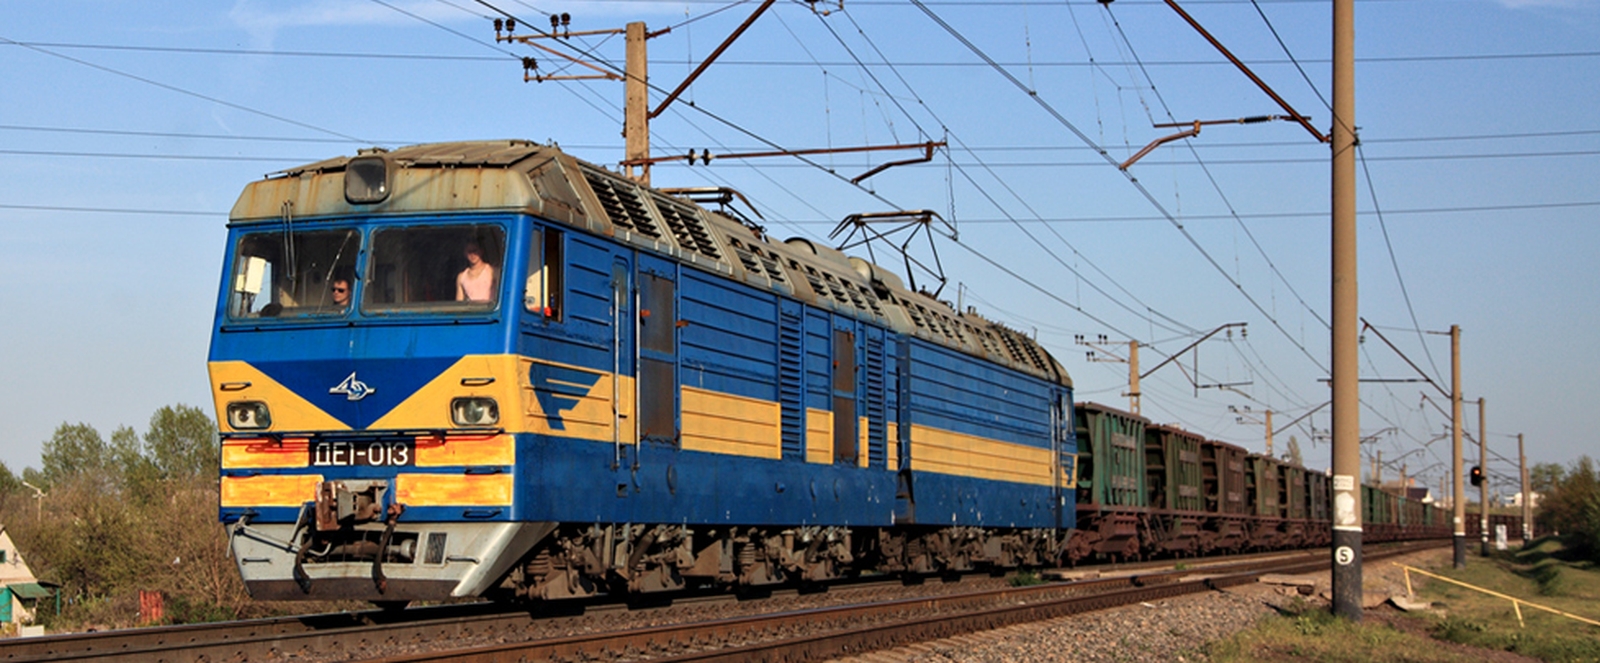 ДЭ1-013 in 2013 with a freight train